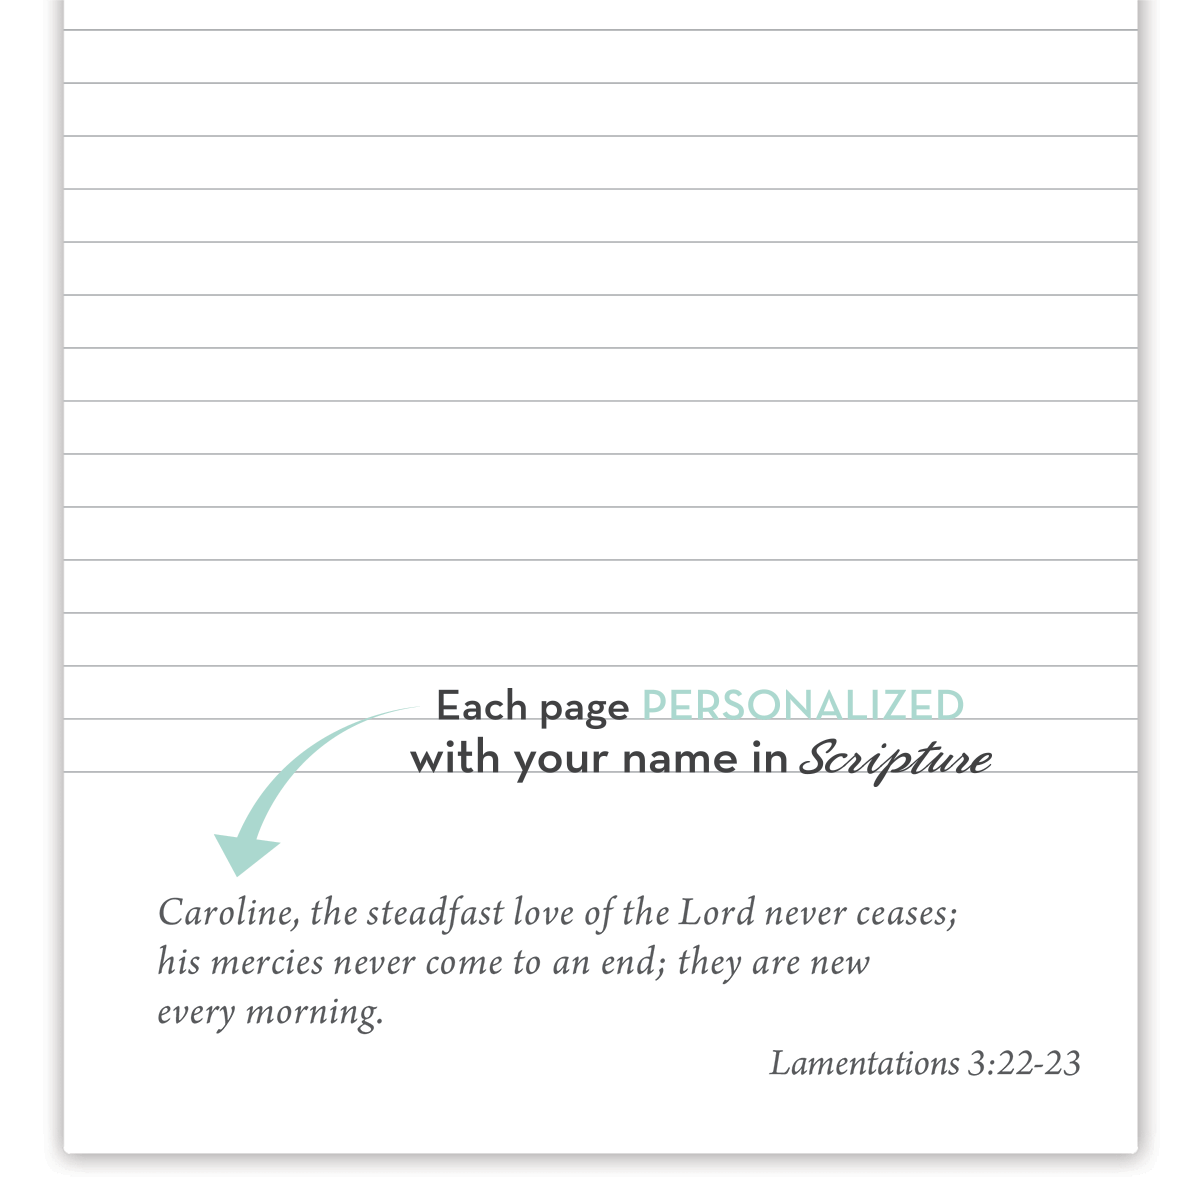 Christian Journals, Christian Planner, Bible journal, personalized scripture, personalized devotional, personalized scripture journal, personalized christian gifts, christian wedding gifts, christian mothers day gifts, prayer journal, free daily devotional, unique christian gifts, christian gift ideas, scripture name